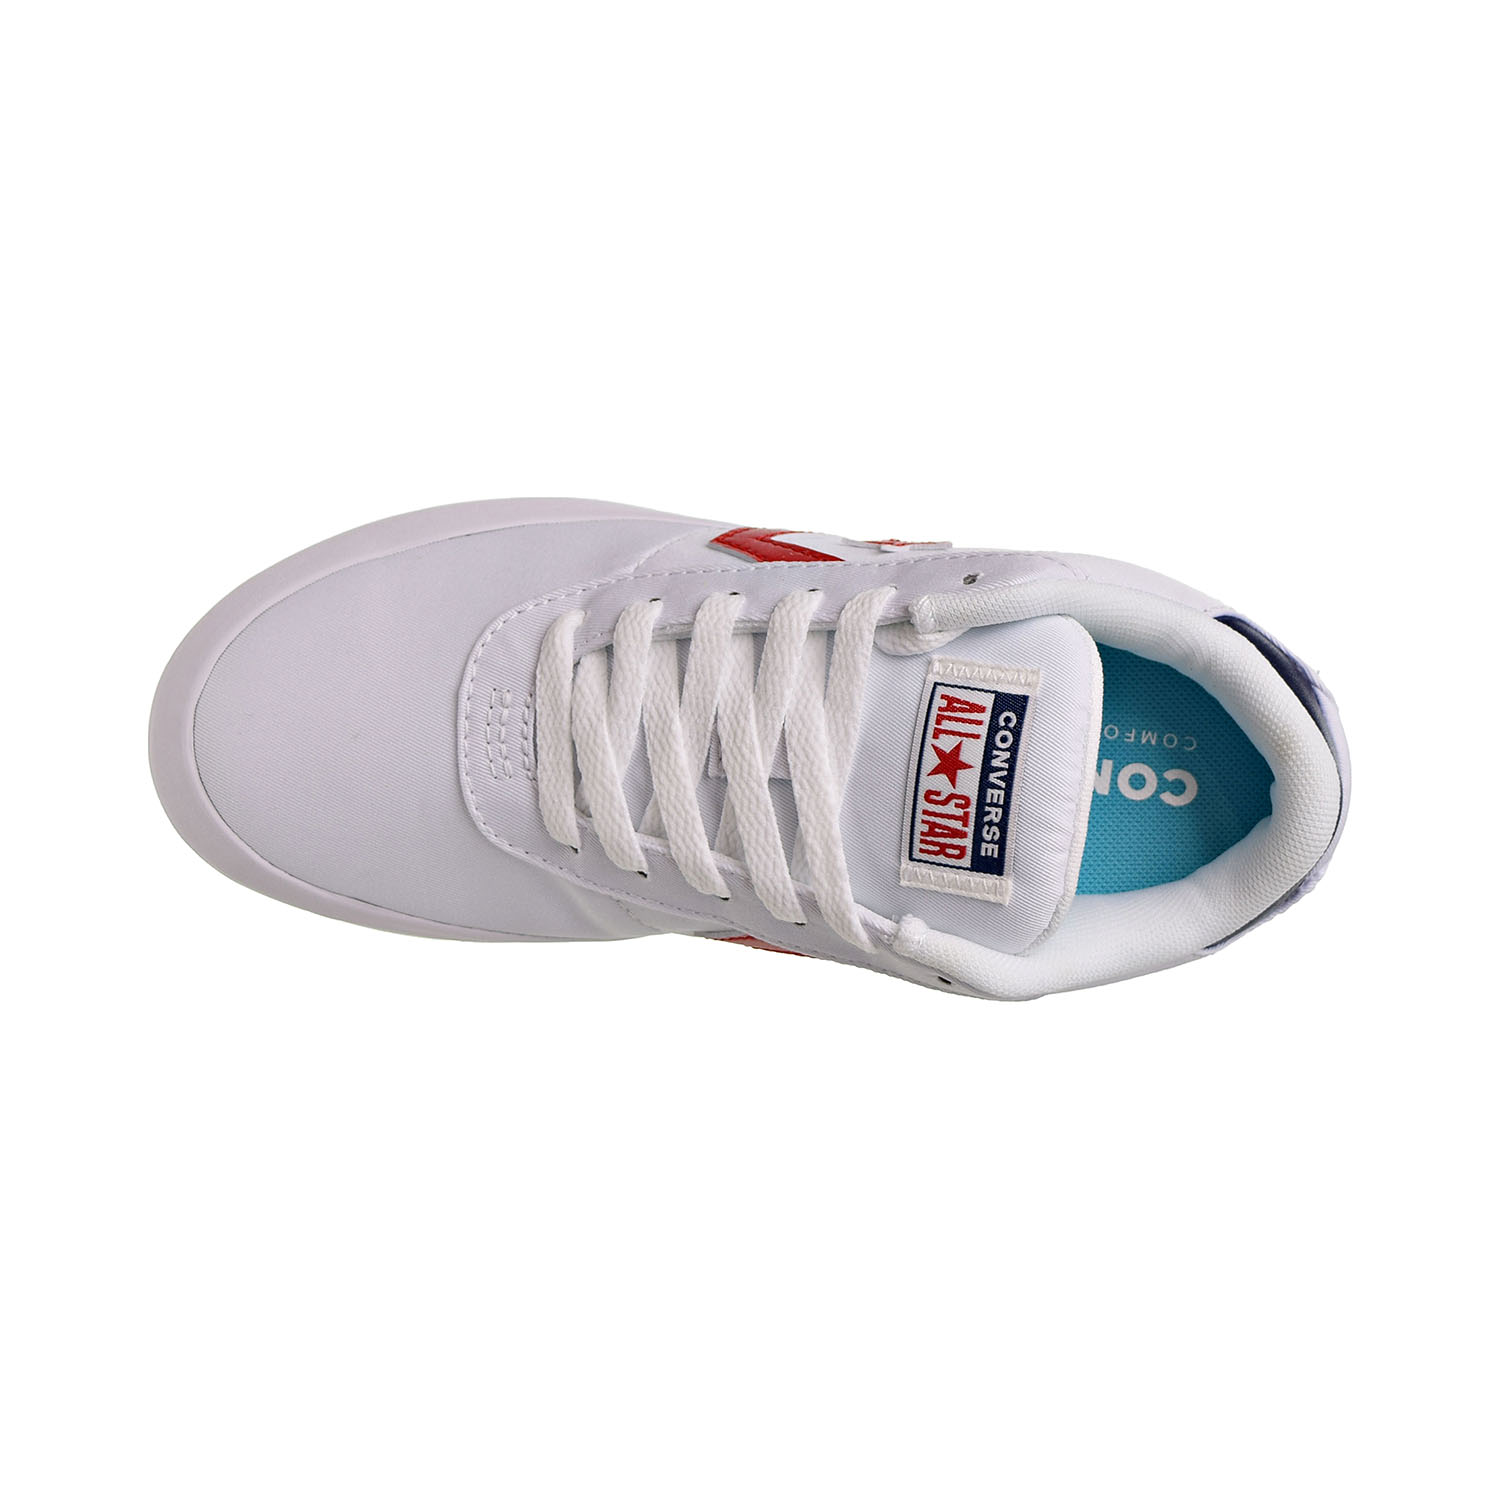 converse point star ox sneakers